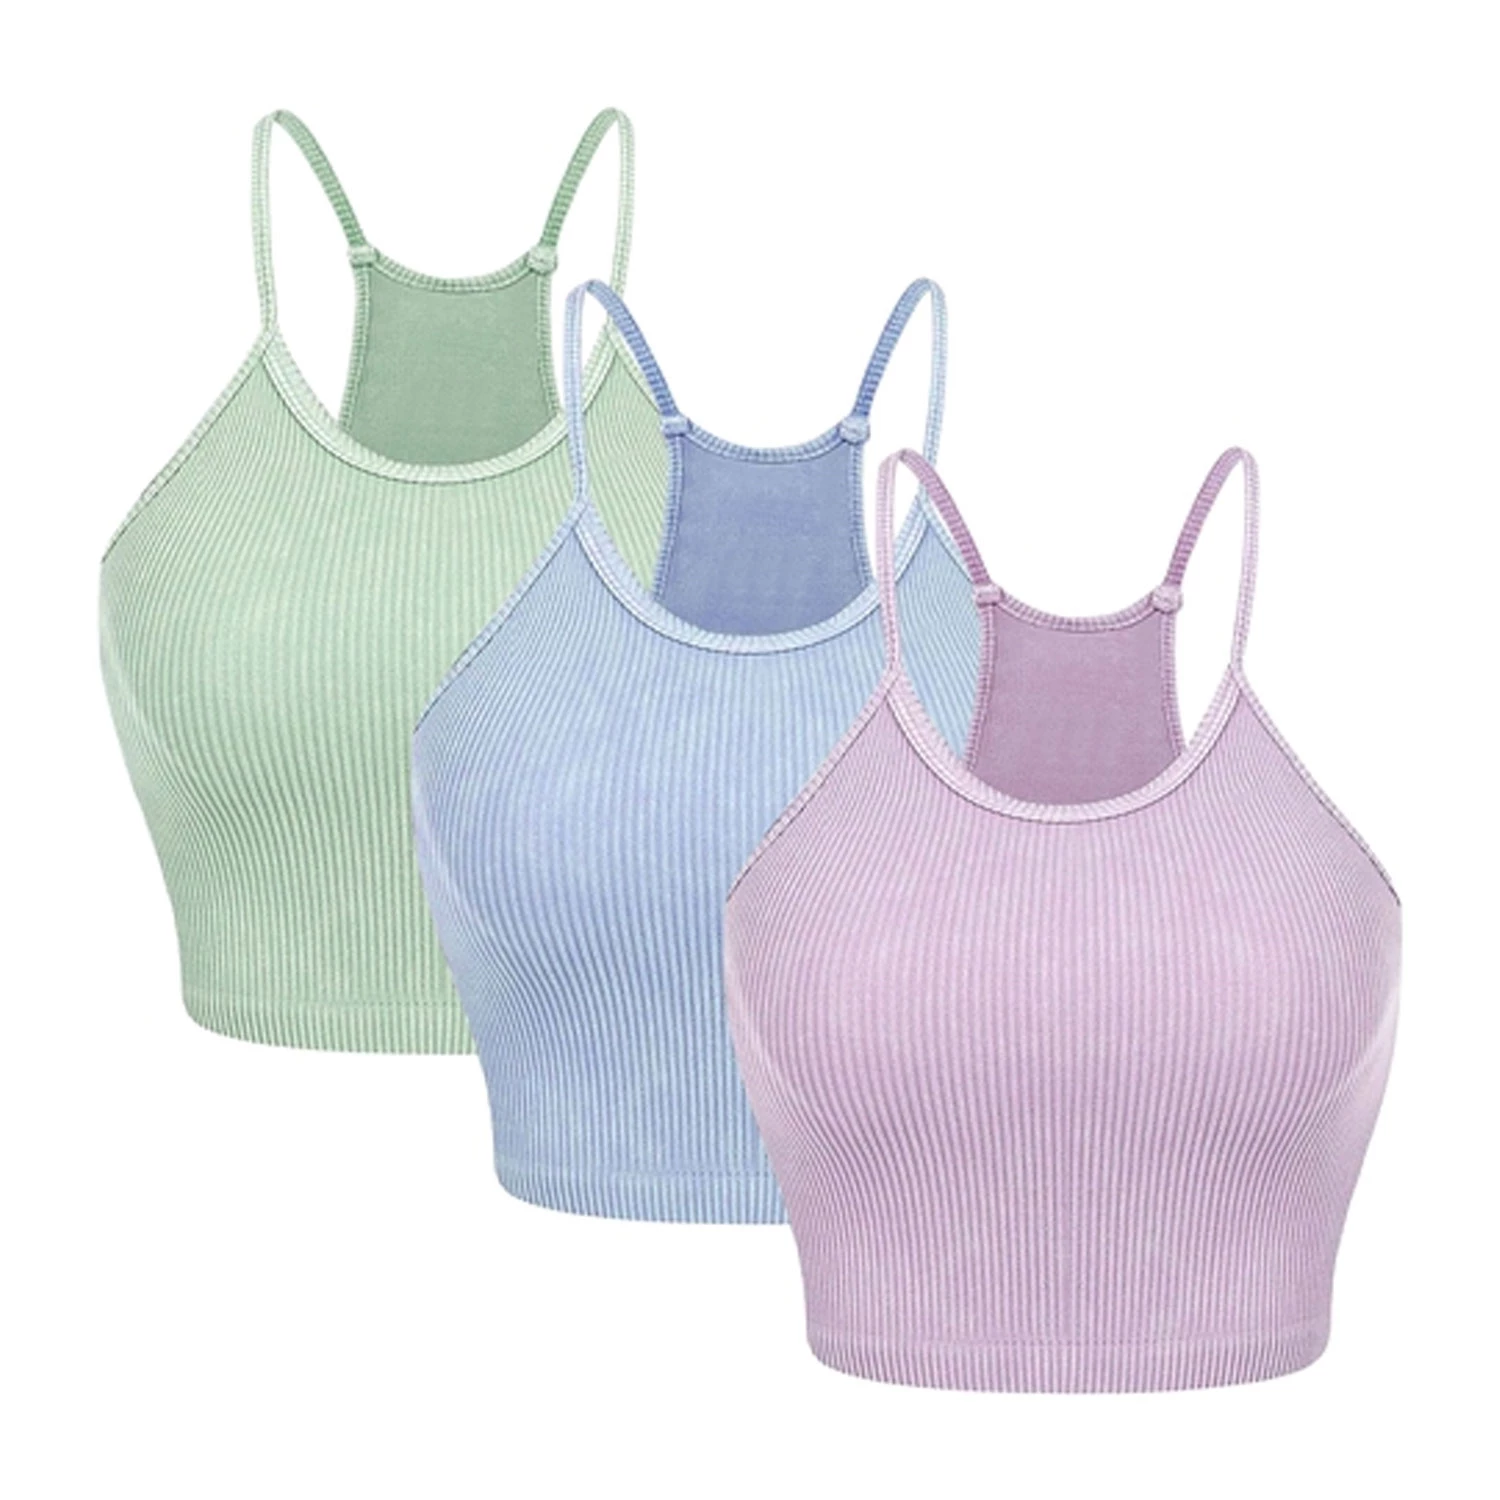 3 Pack Women Crop Basic Tank Top Ribbed Knit Sleeveless Round Neck 9 Color Machine Wash Summer Crop